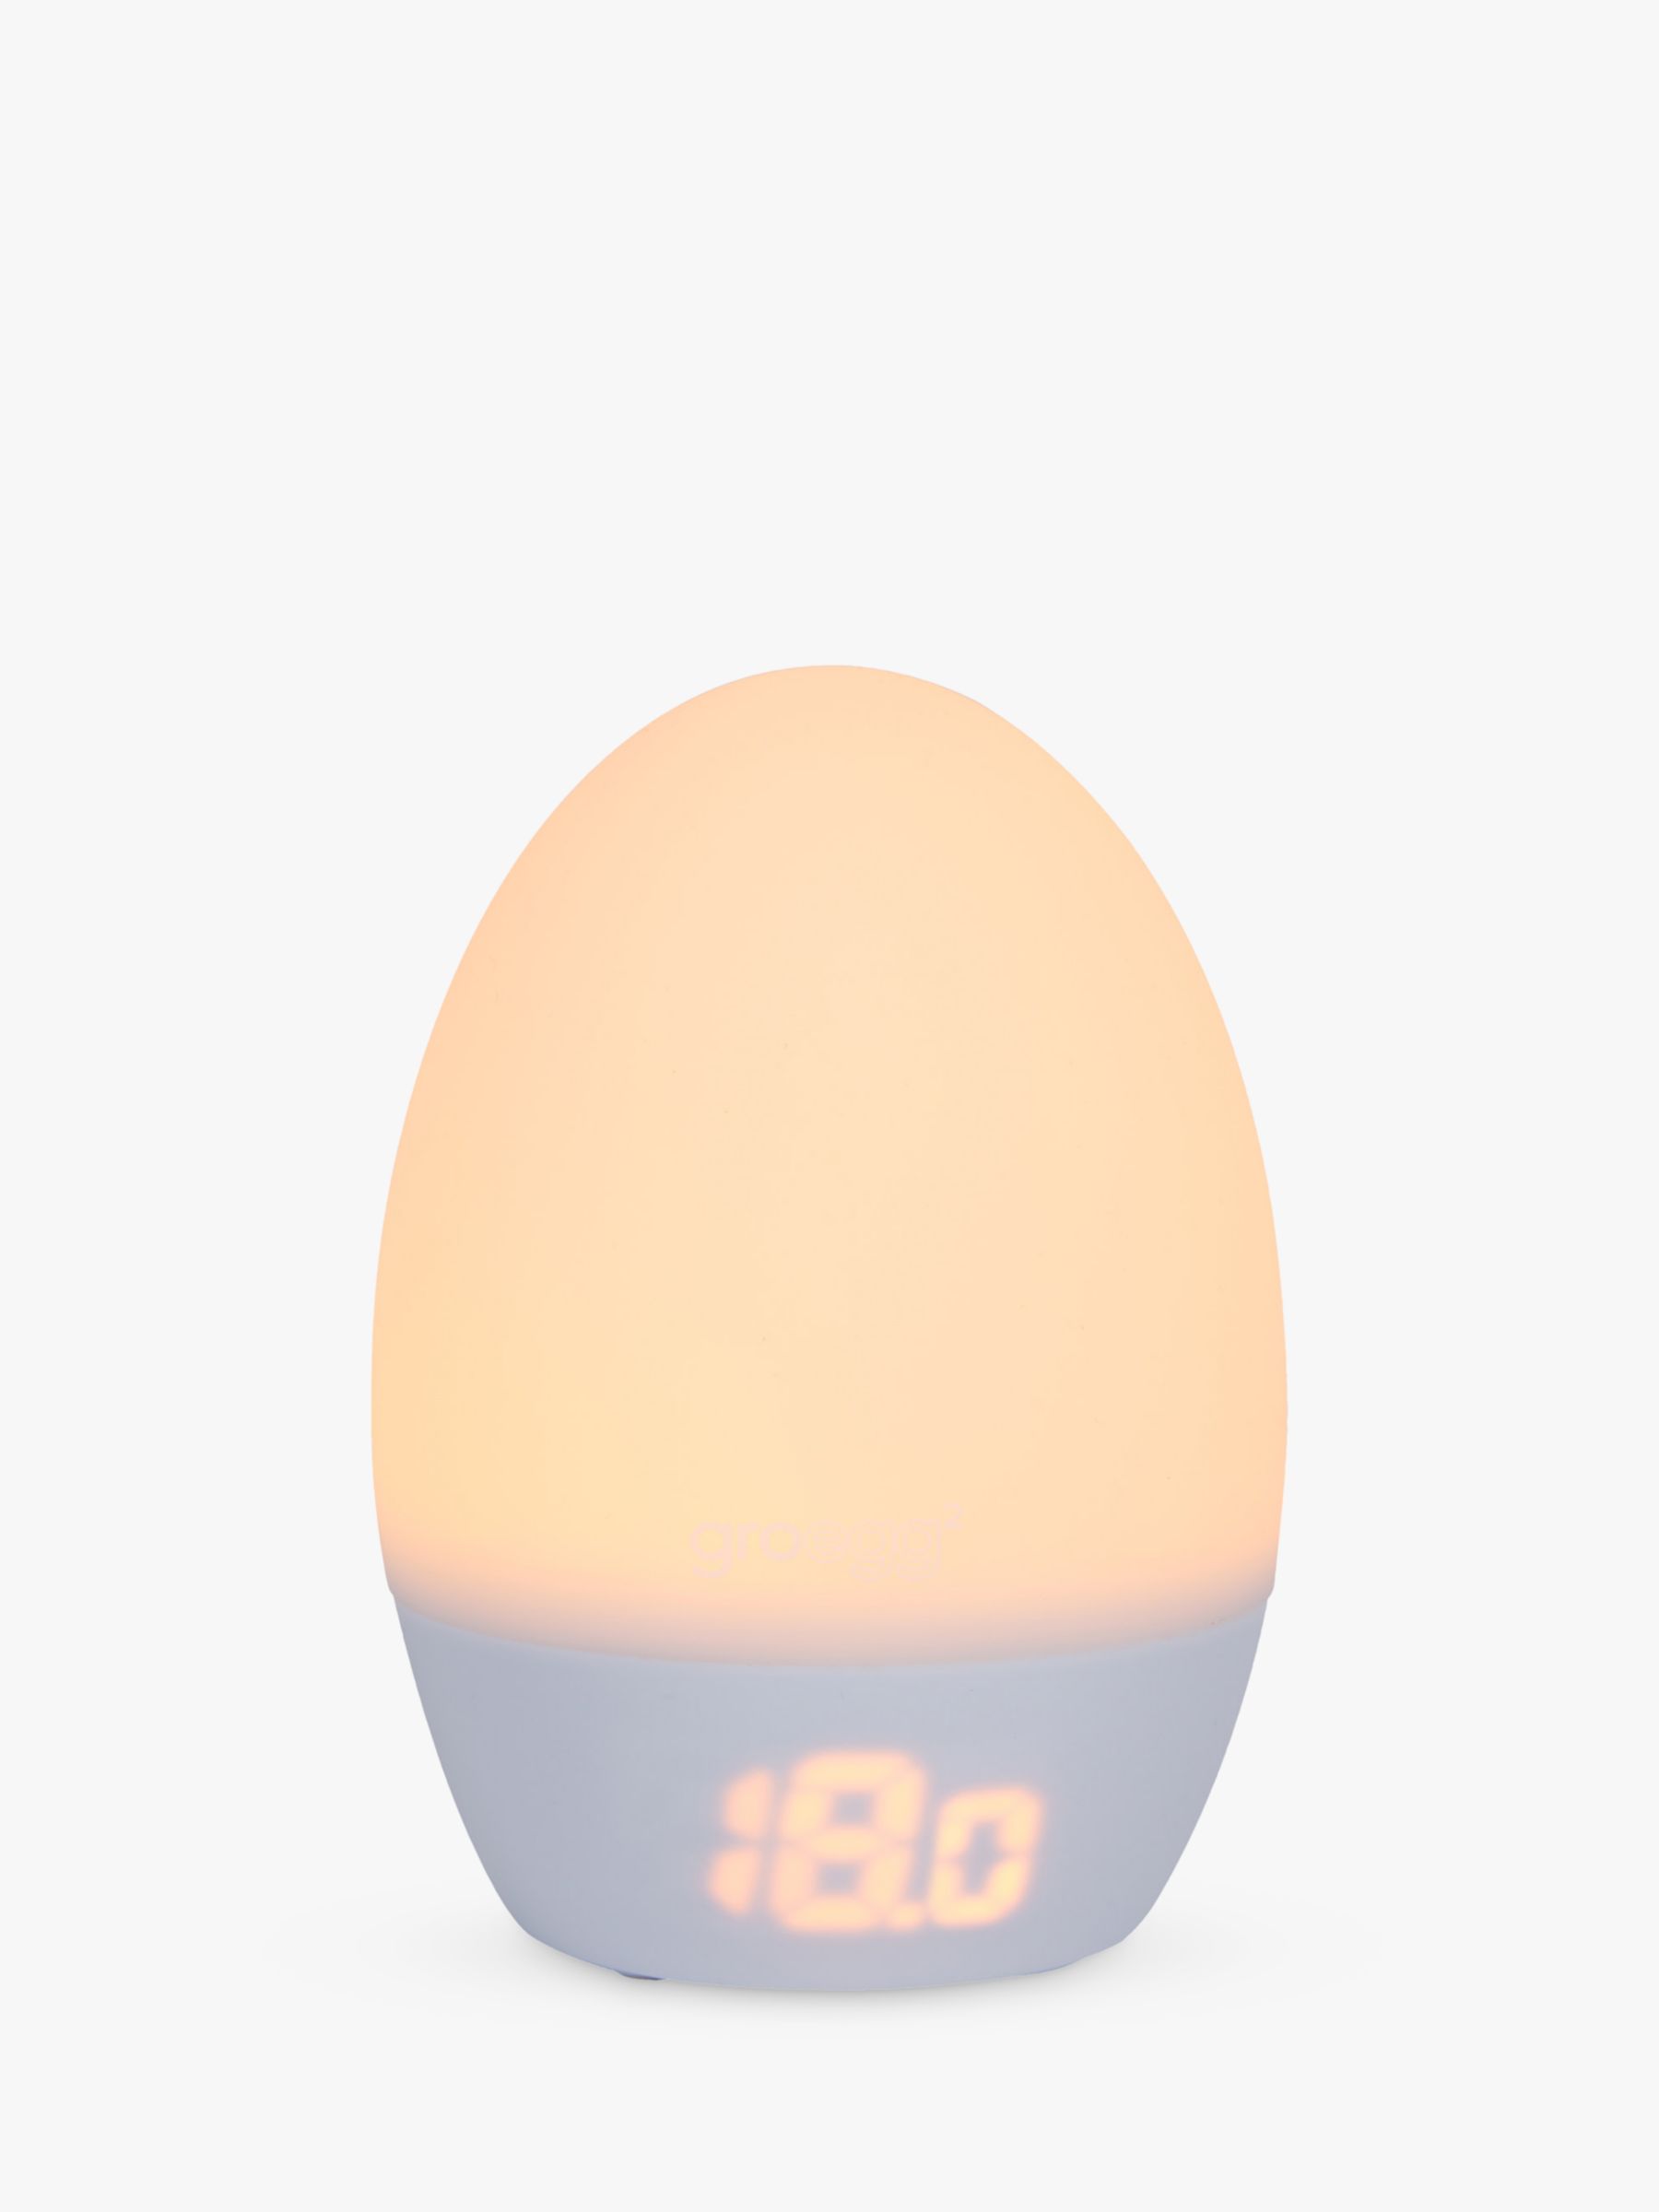 Tommee Tippee Groegg Digital thermometer  Digital thermometer, Thermometer,  Room thermometer